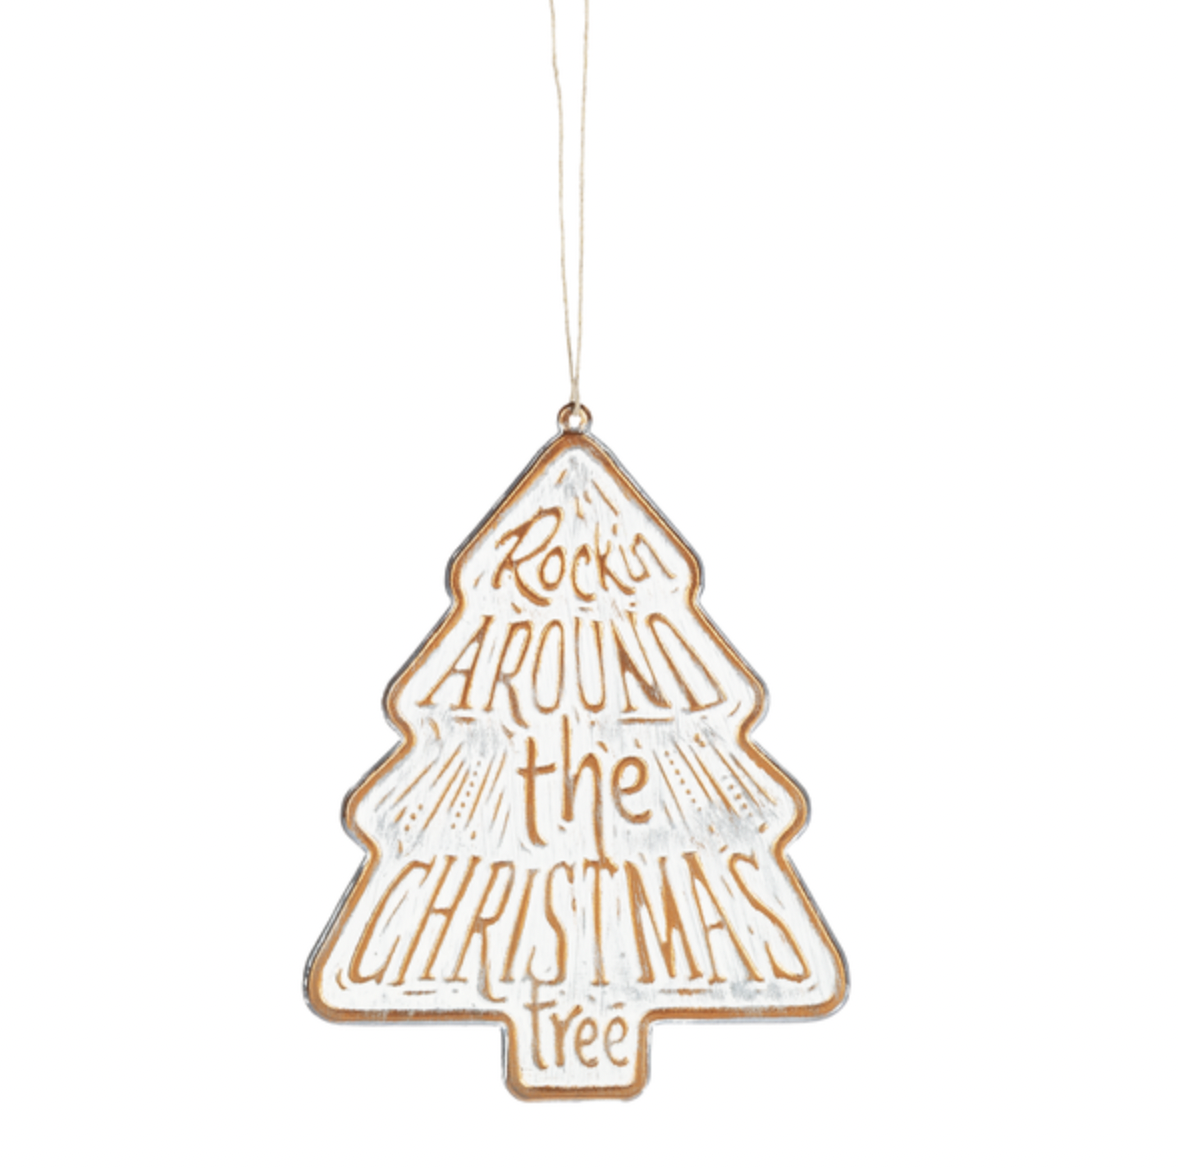 Around the Christmas Tree Copper Embossed Ornament